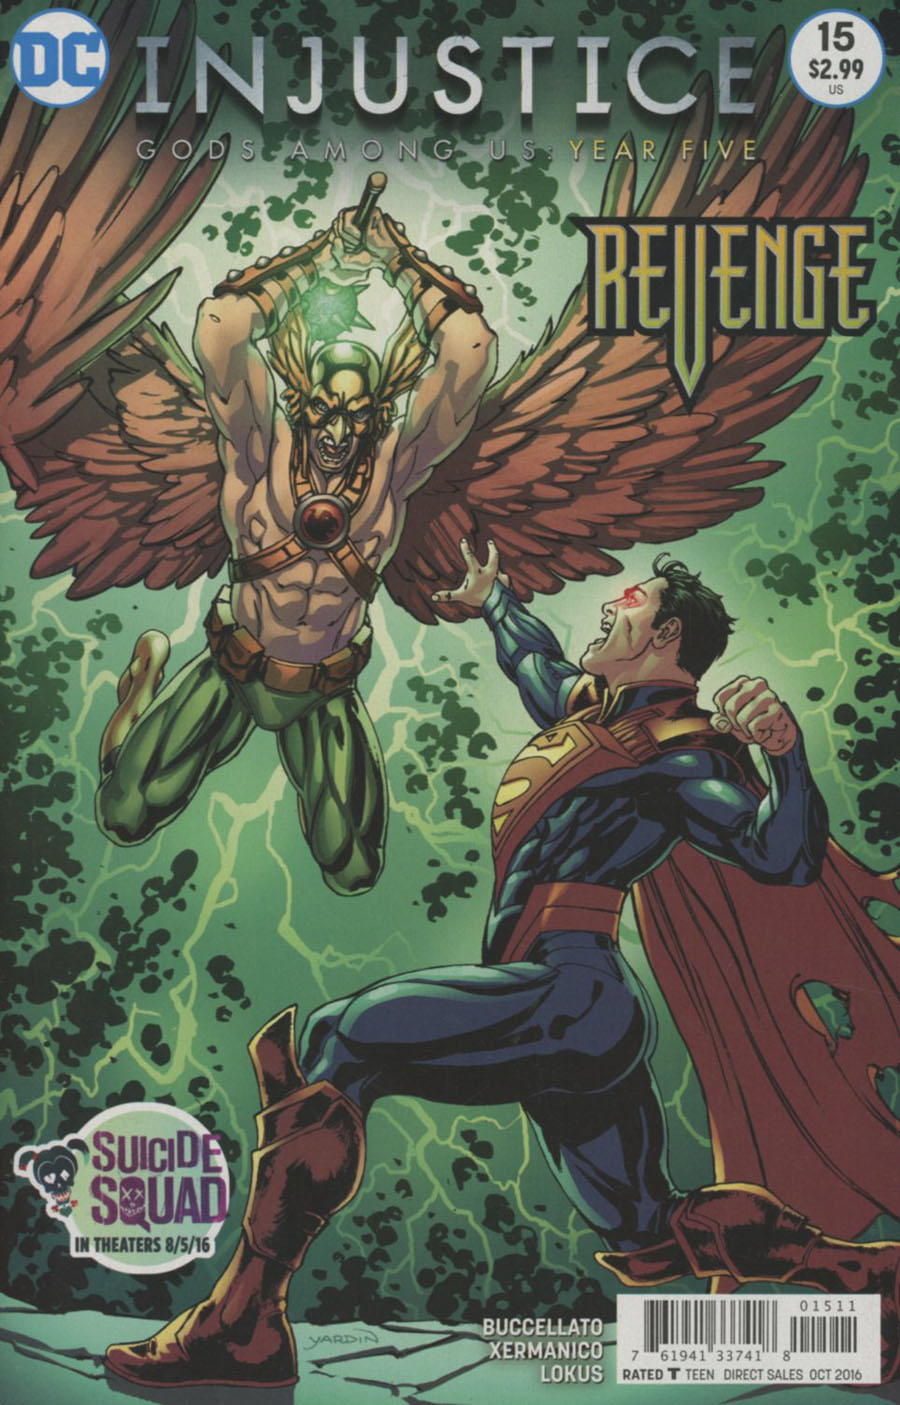 Injustice Gods Among Us Year Five #15